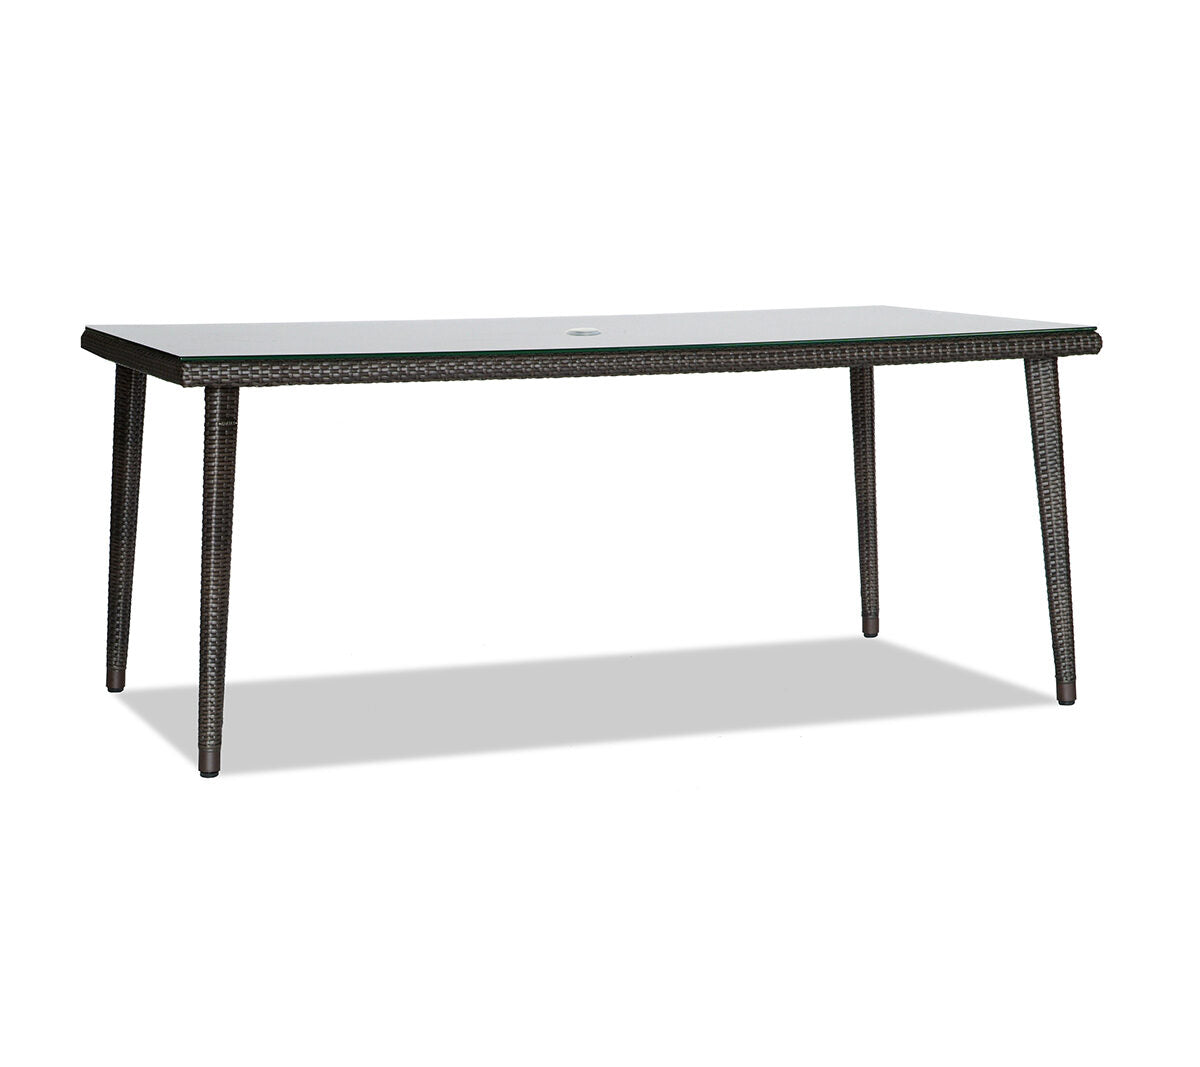 Palm Harbor 71" x 38" Rectangular Dining Table with Glass